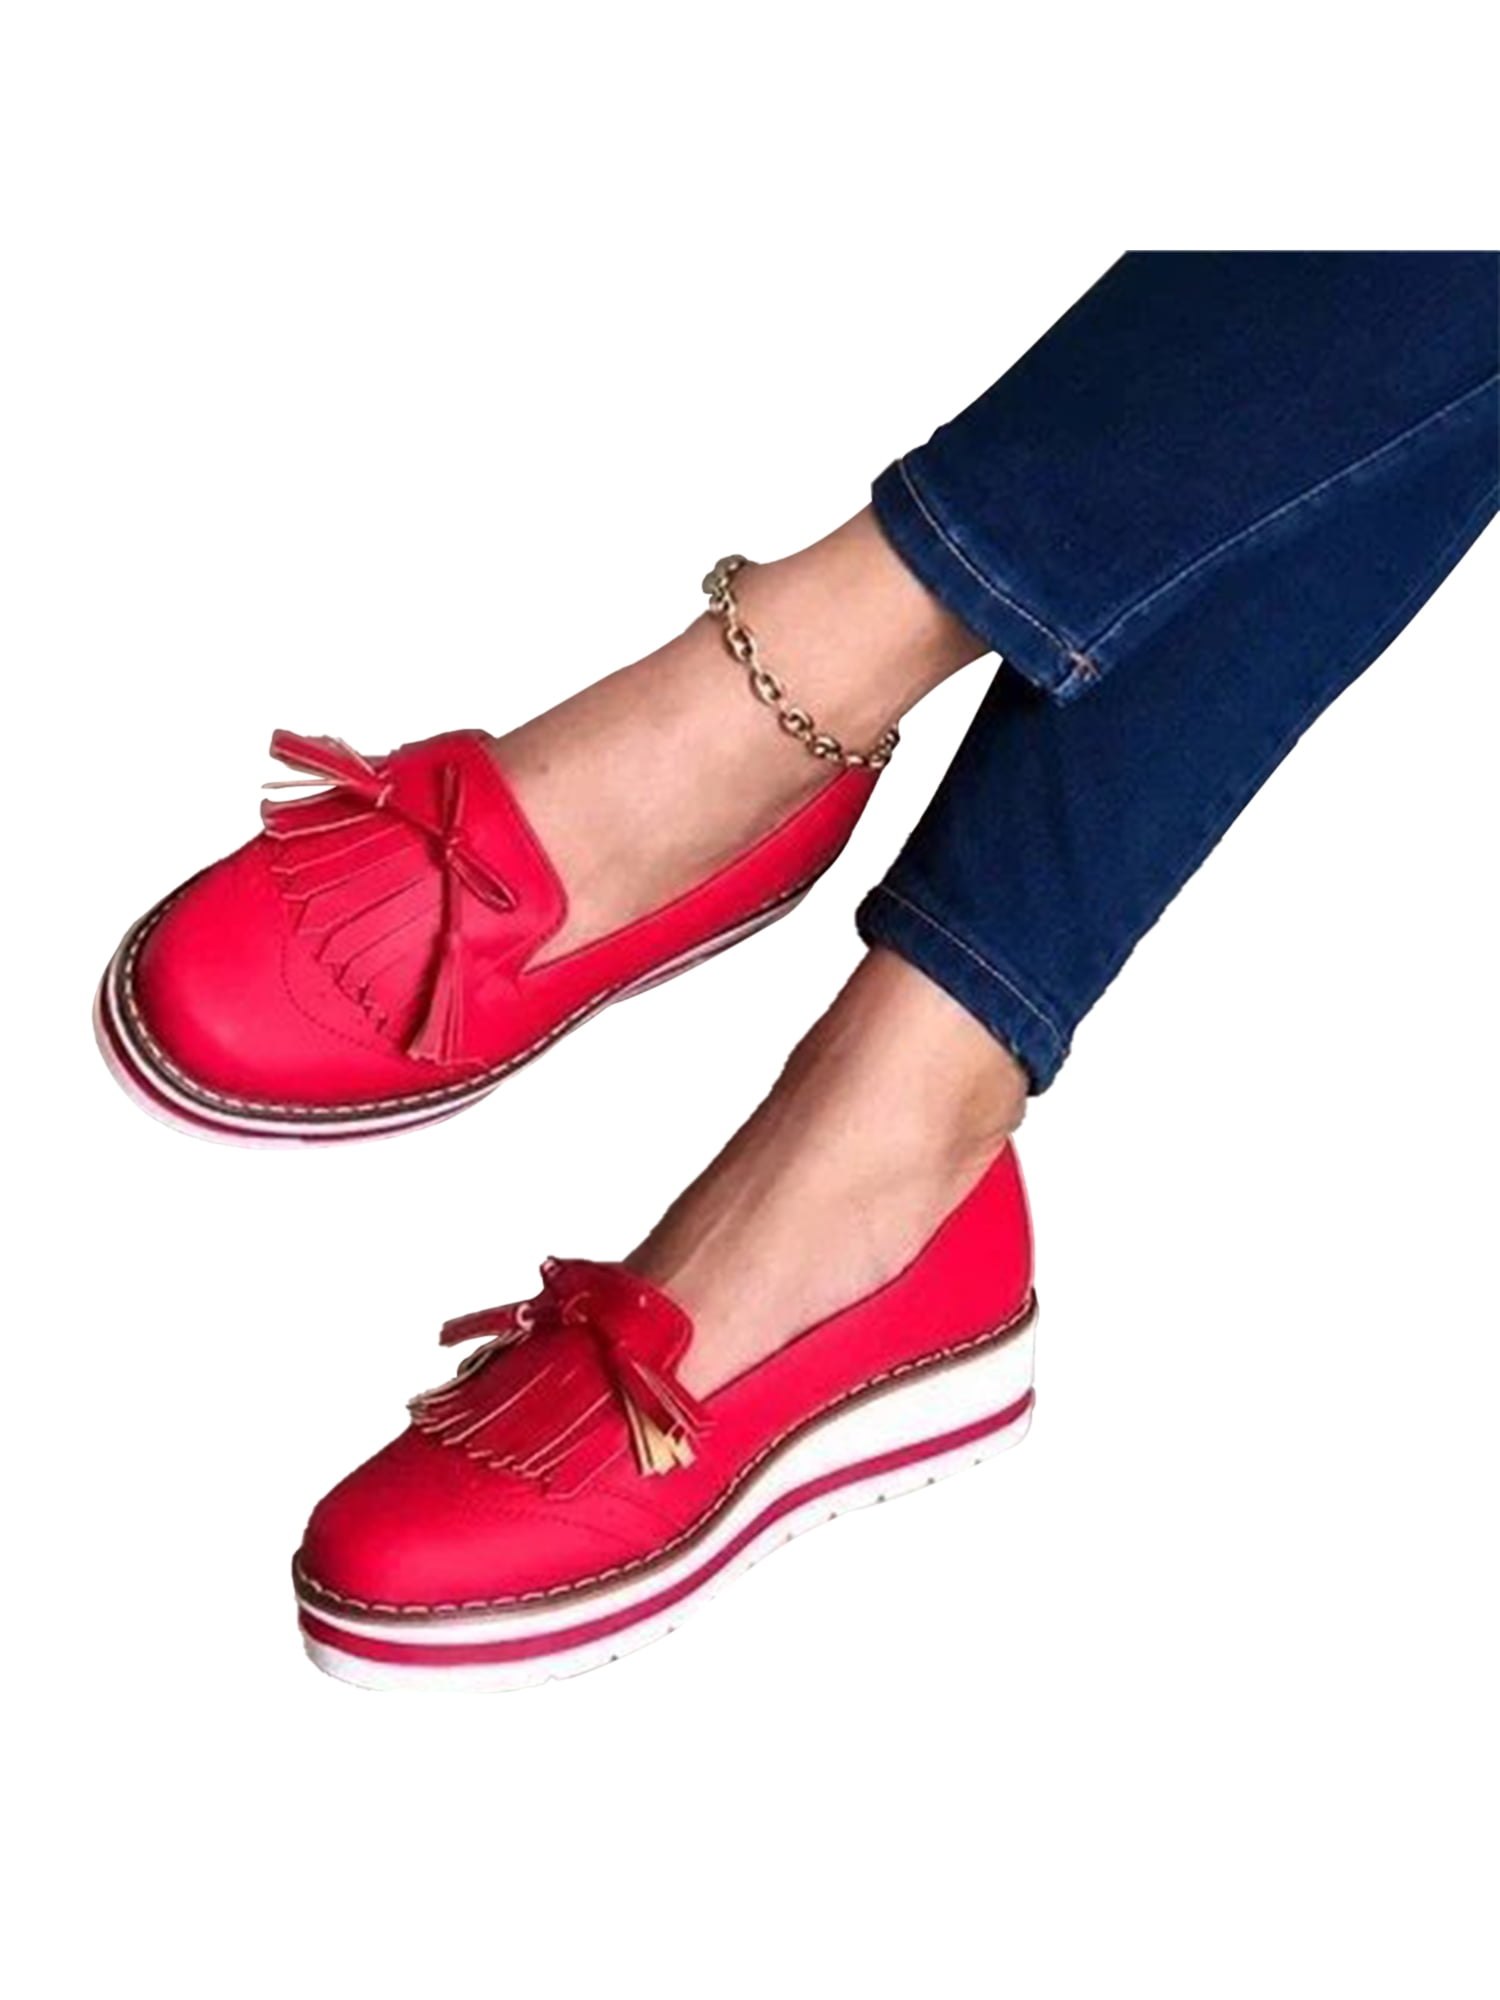 Womens Leather Flats Loafers Height Increase Elevator Shoes Wedge Casual Shoes